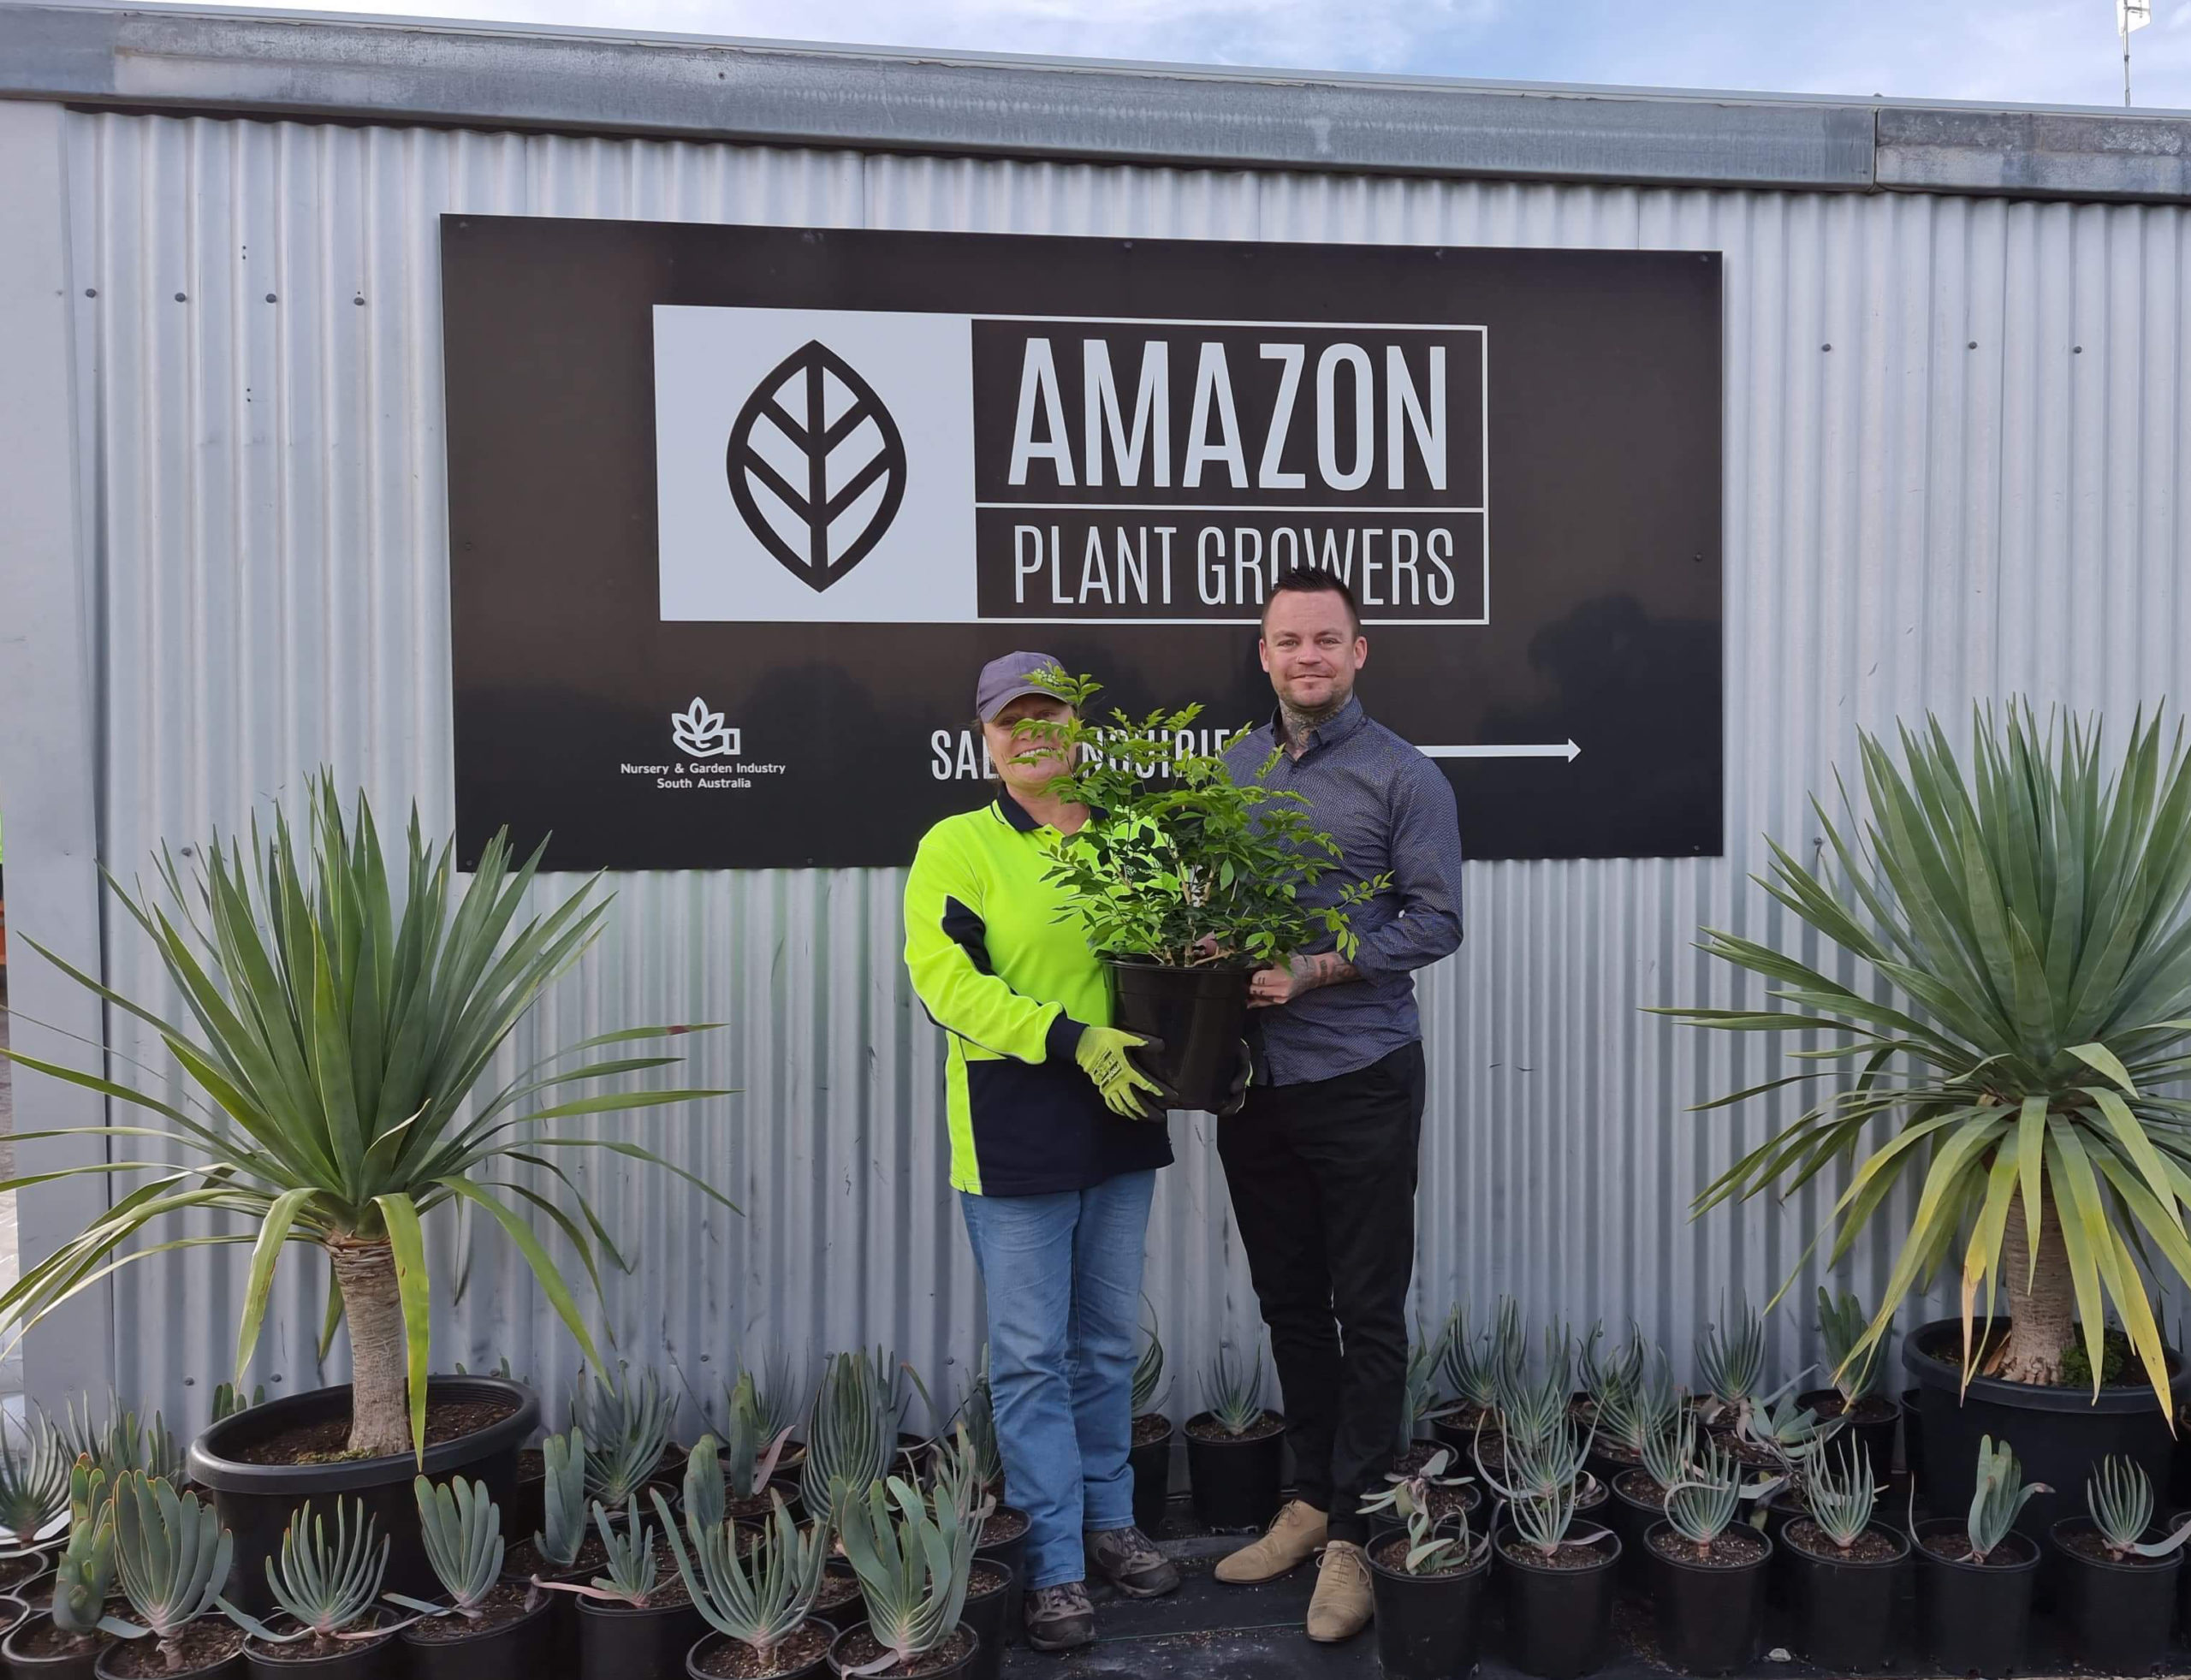 Two people posing for photo in front of Amazon plant growers